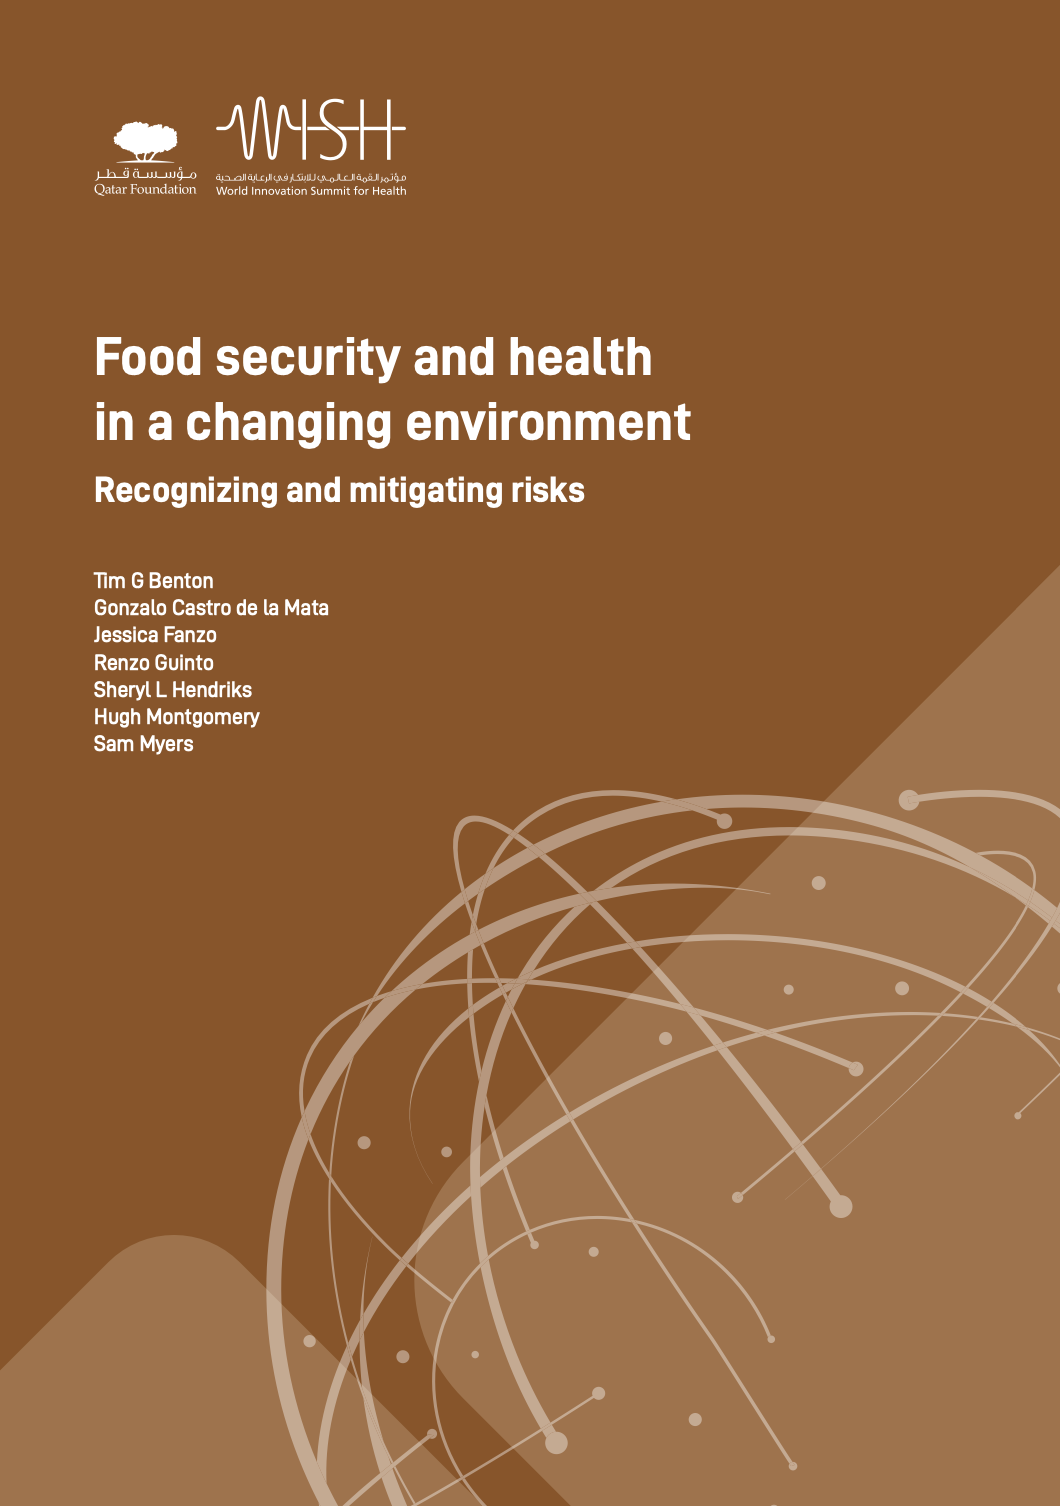 Food security and health in a changing environment